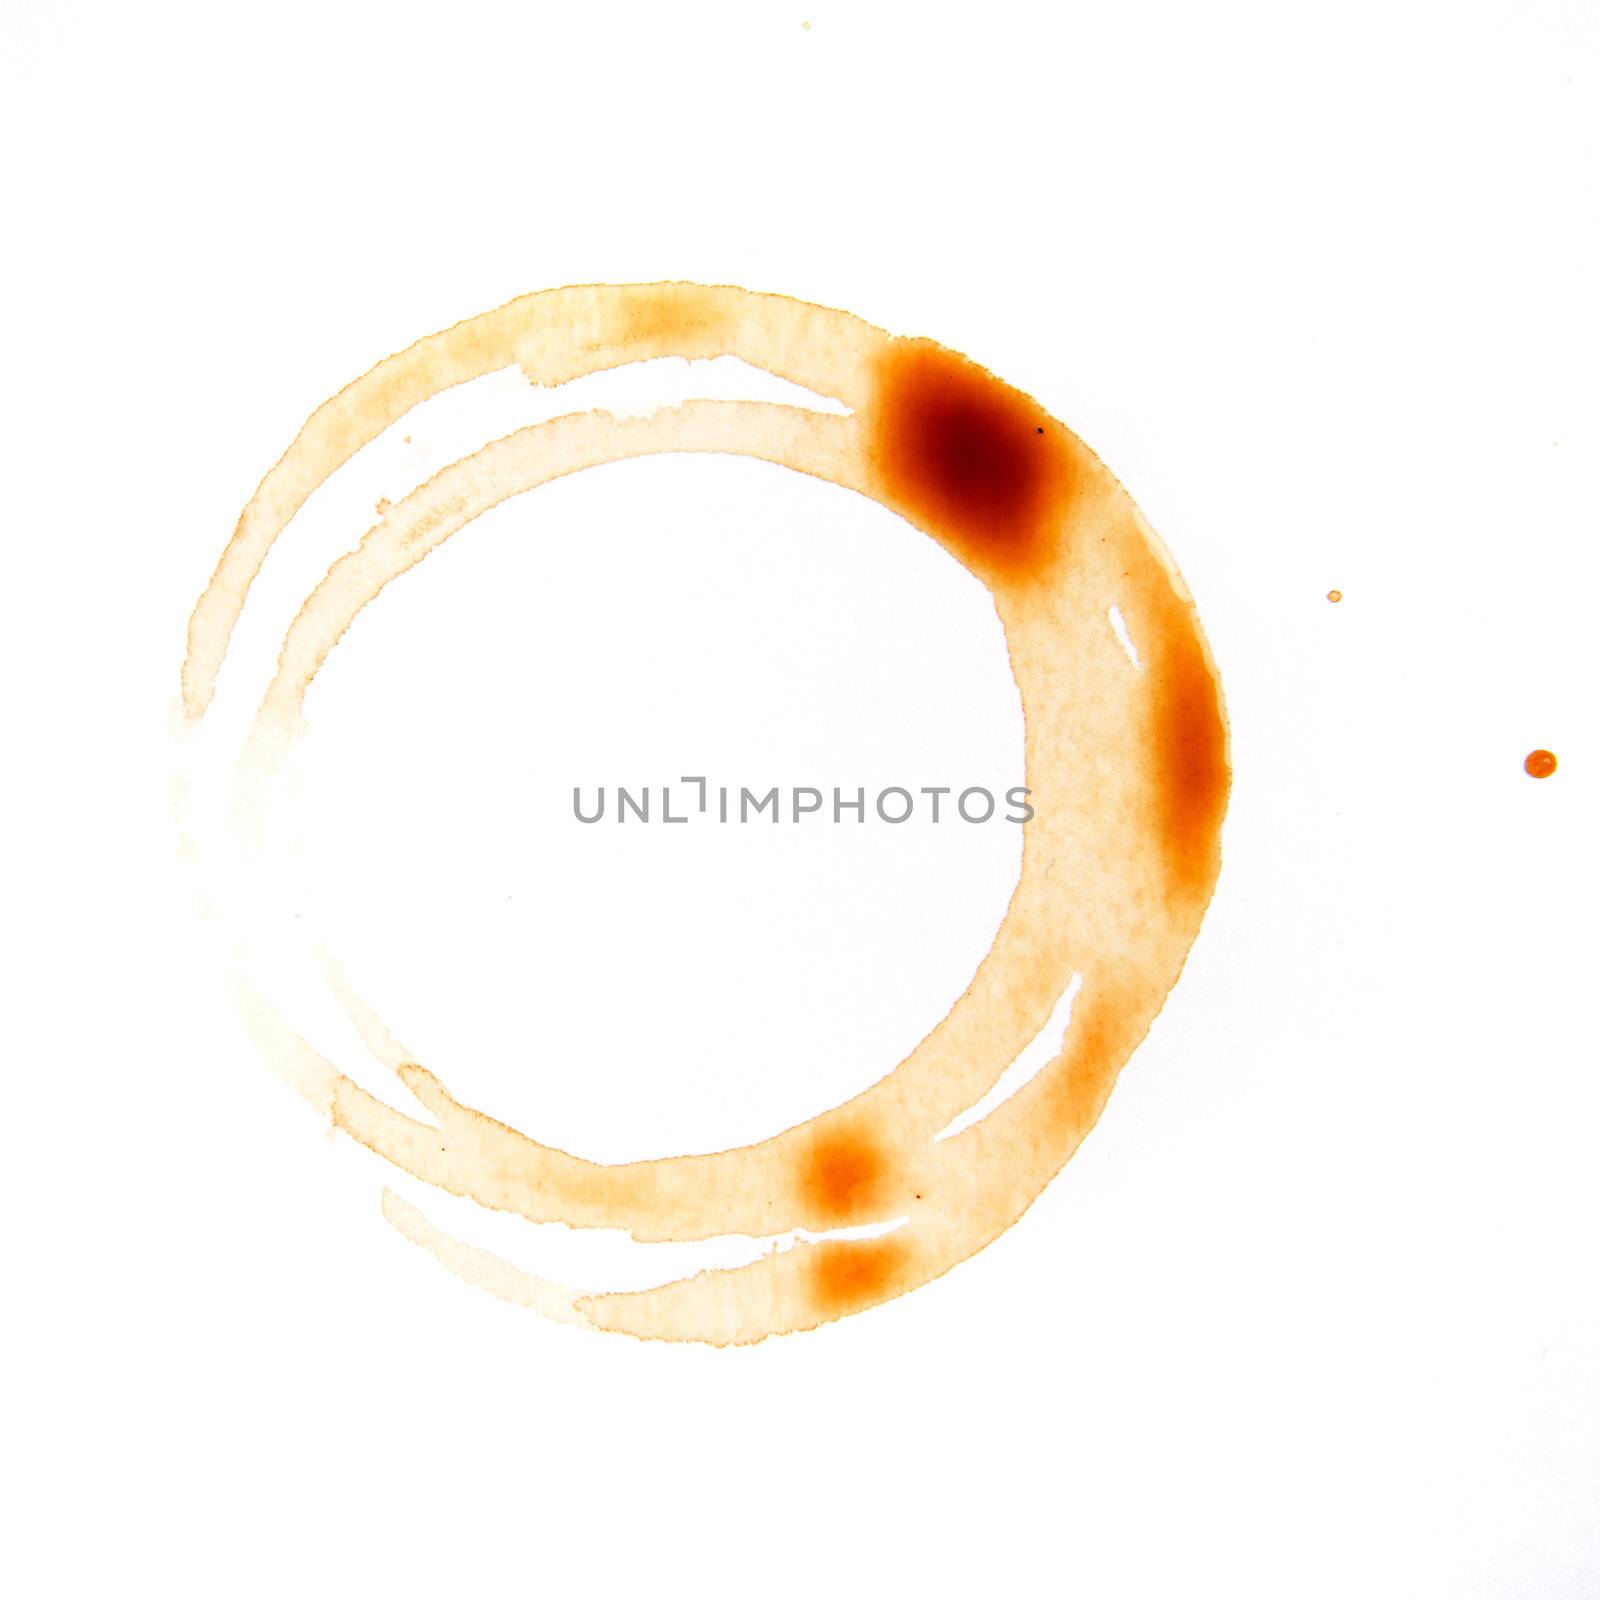 A fresh coffee stain isolated on white